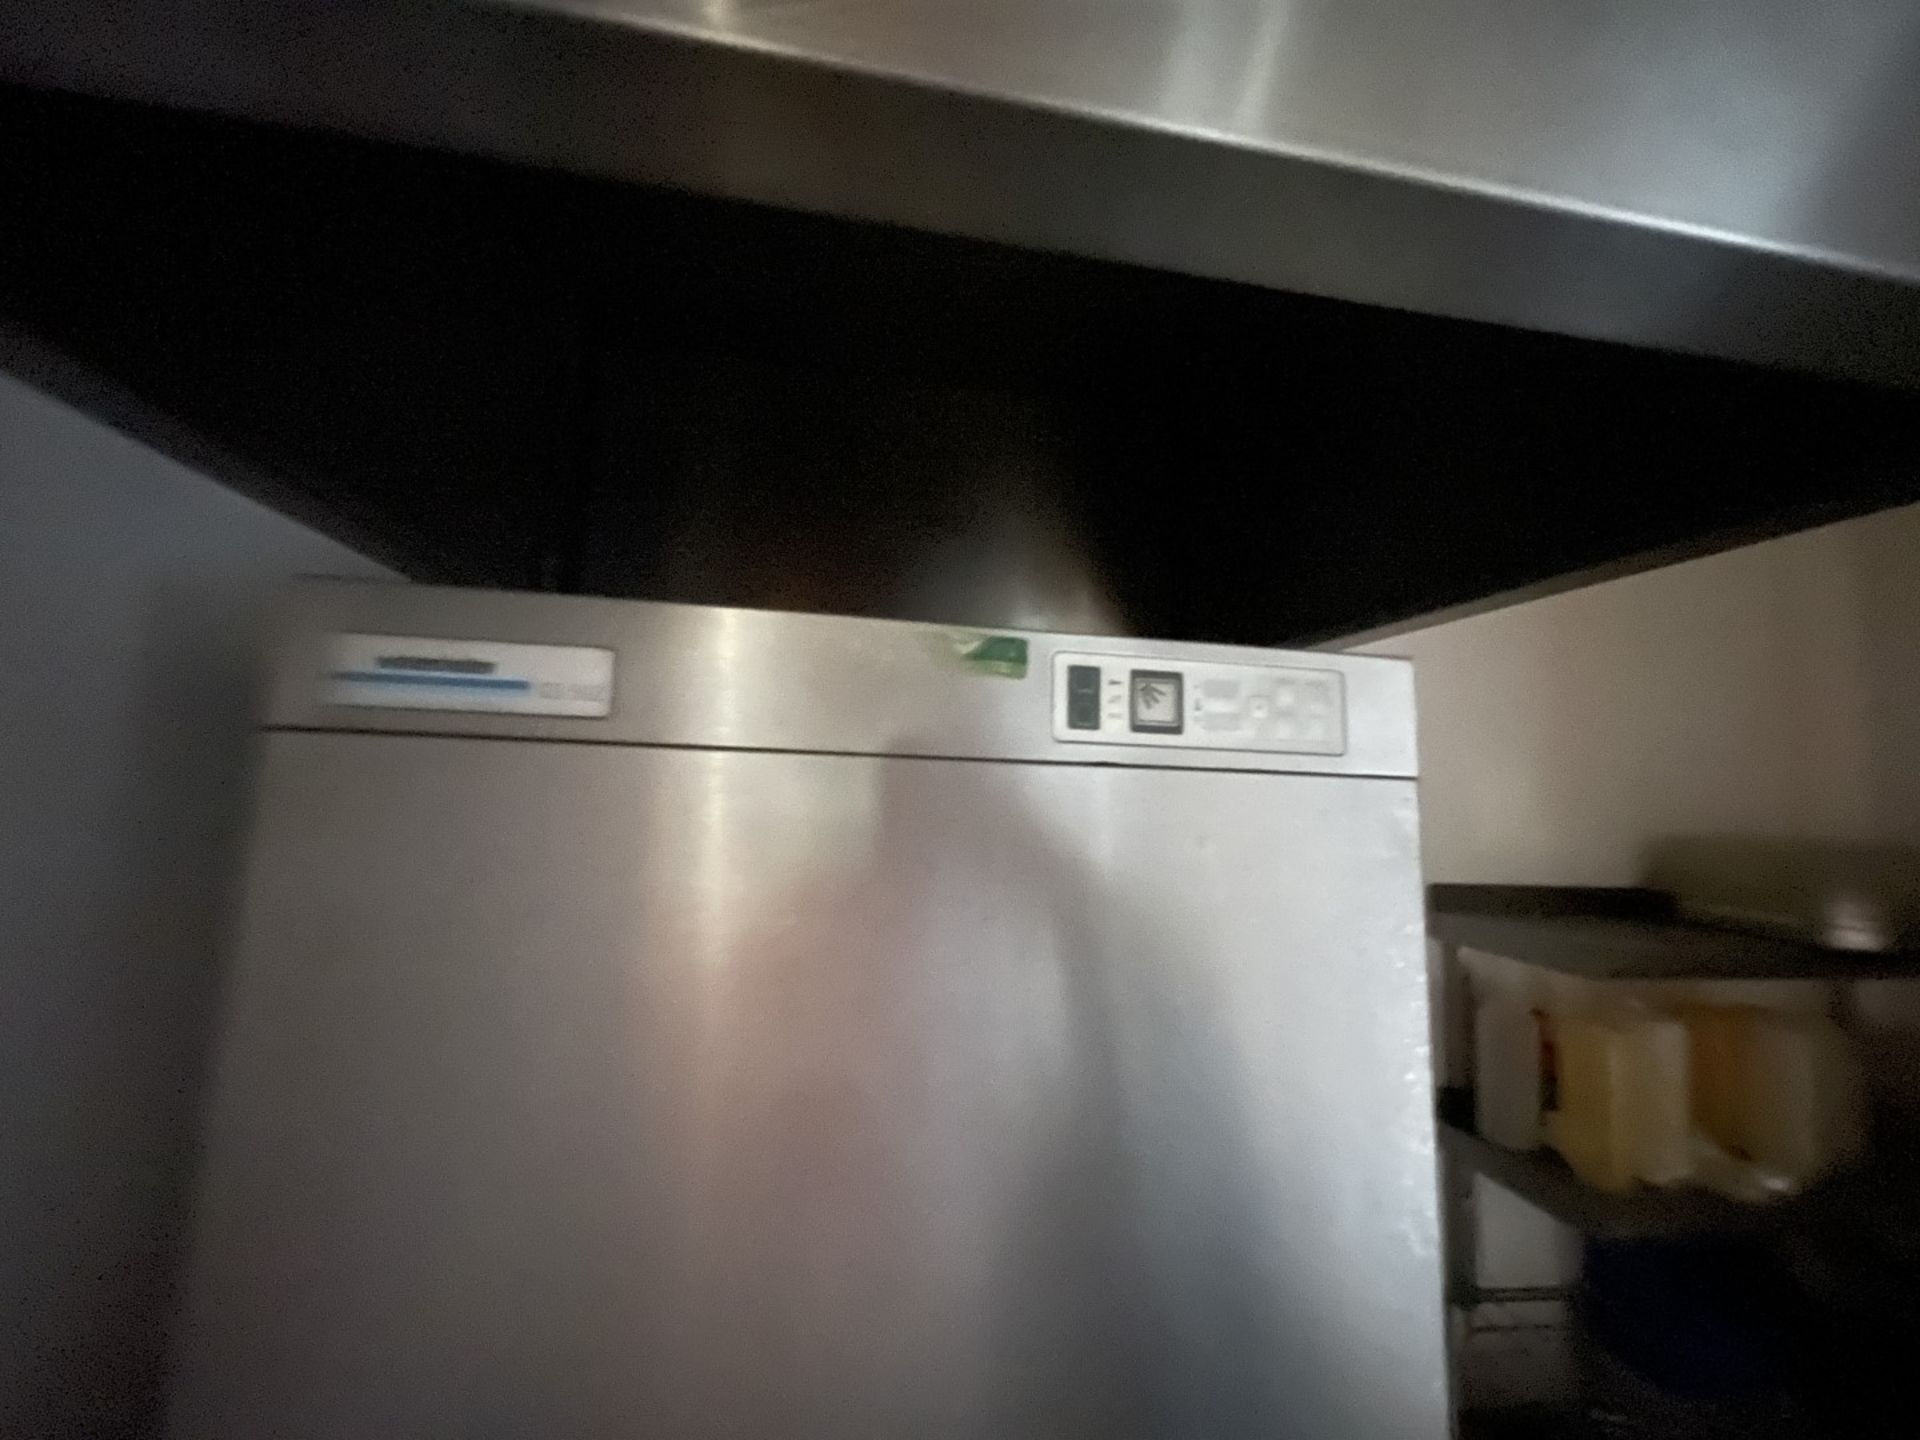 1 x Winterhalter GS502 Passthrough Dishwasher Complete With Inlet, Outlet, Sink, Canopy, Grease Trap - Image 6 of 10